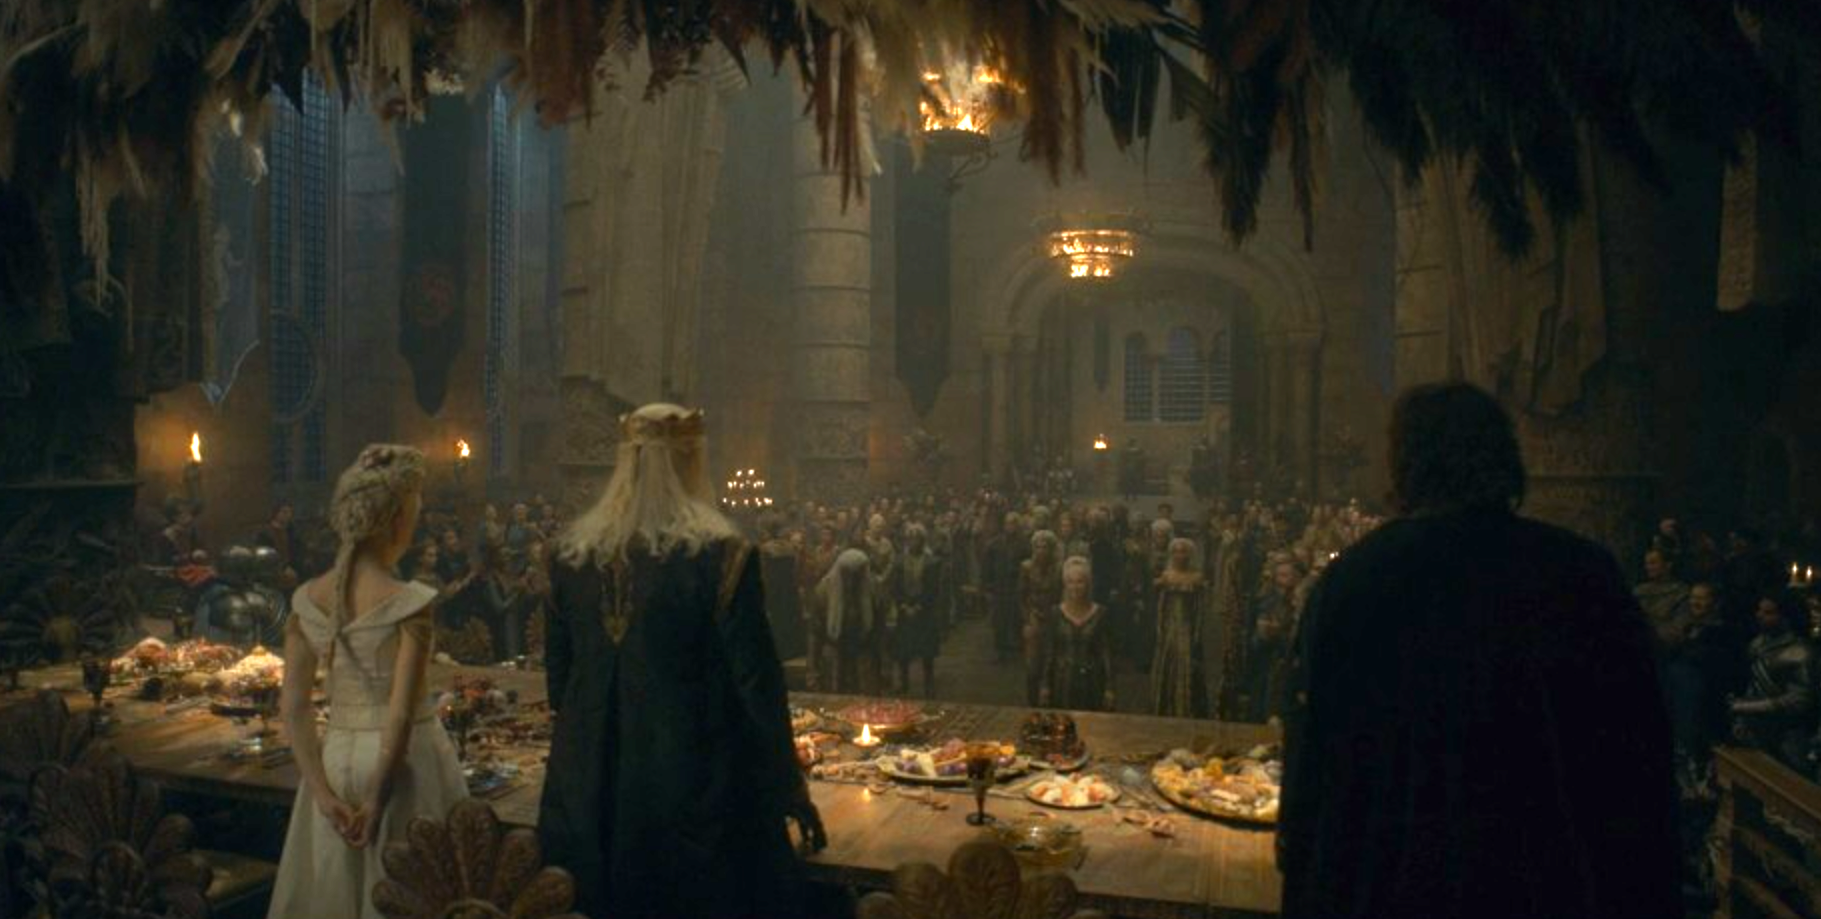 The Great Hall filled with guests, Rhaenyra and Viserys sitting at the head table greeting the Velaryons.